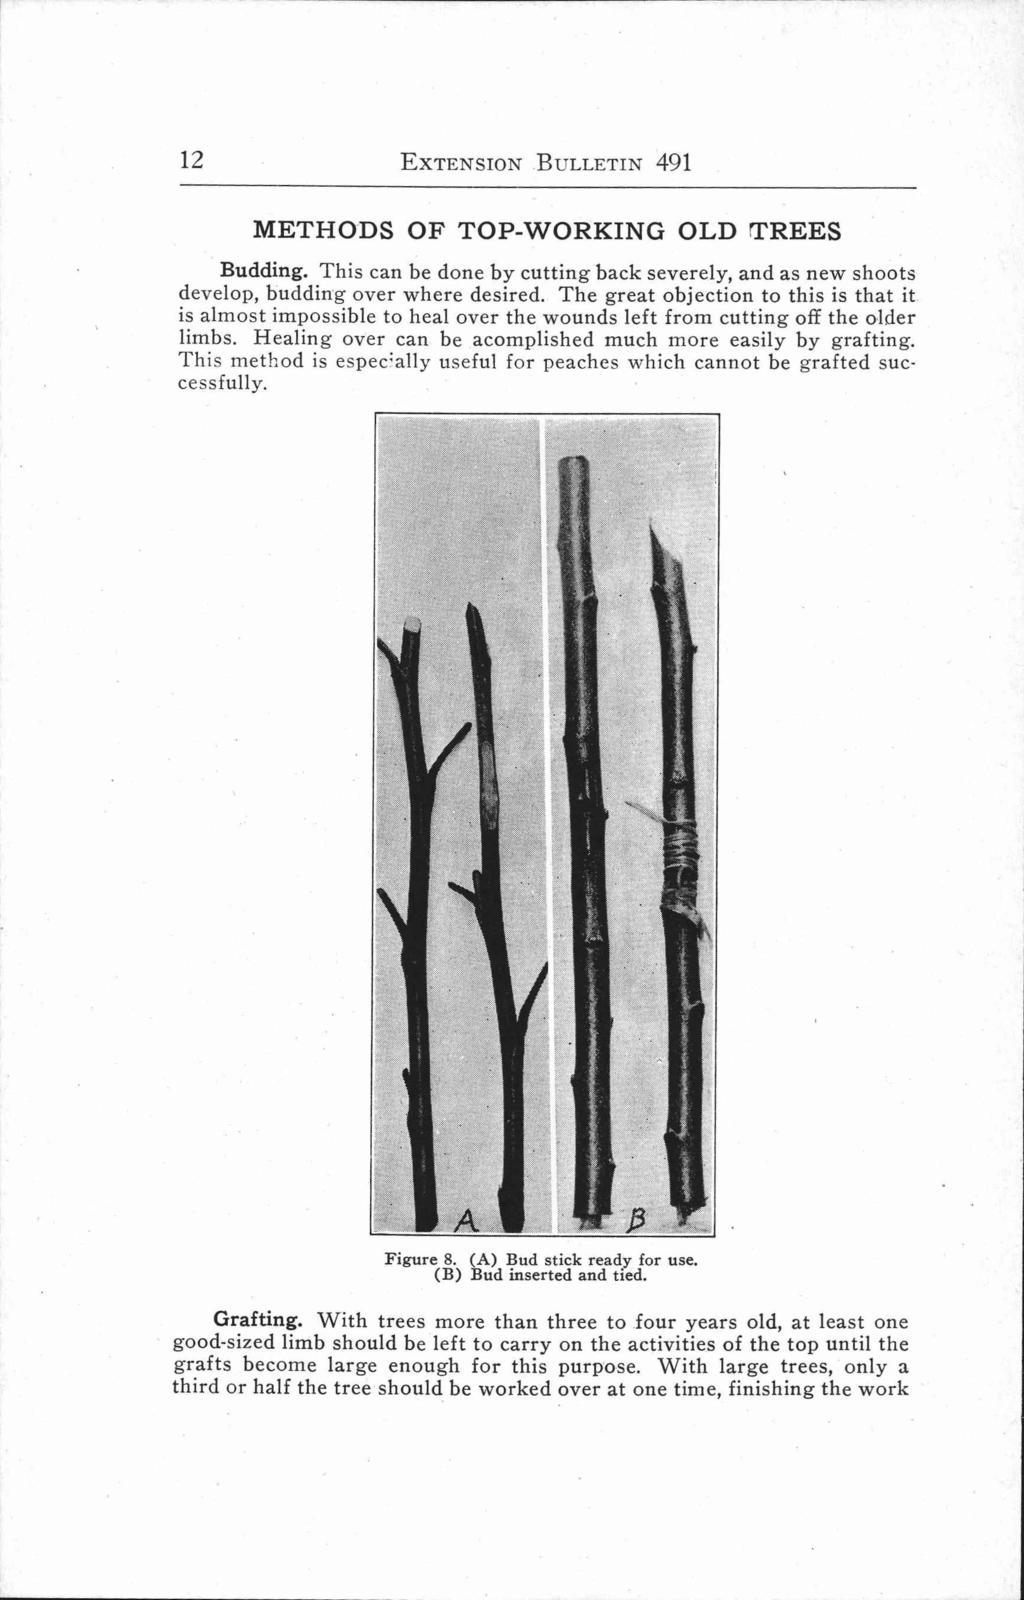 12 EXTENSION BULLETIN 491 METHODS OF TOP-WORKING OLD TREES Budding. This can be done by cutting back severely, and as new shoots develop, budding over where desired.